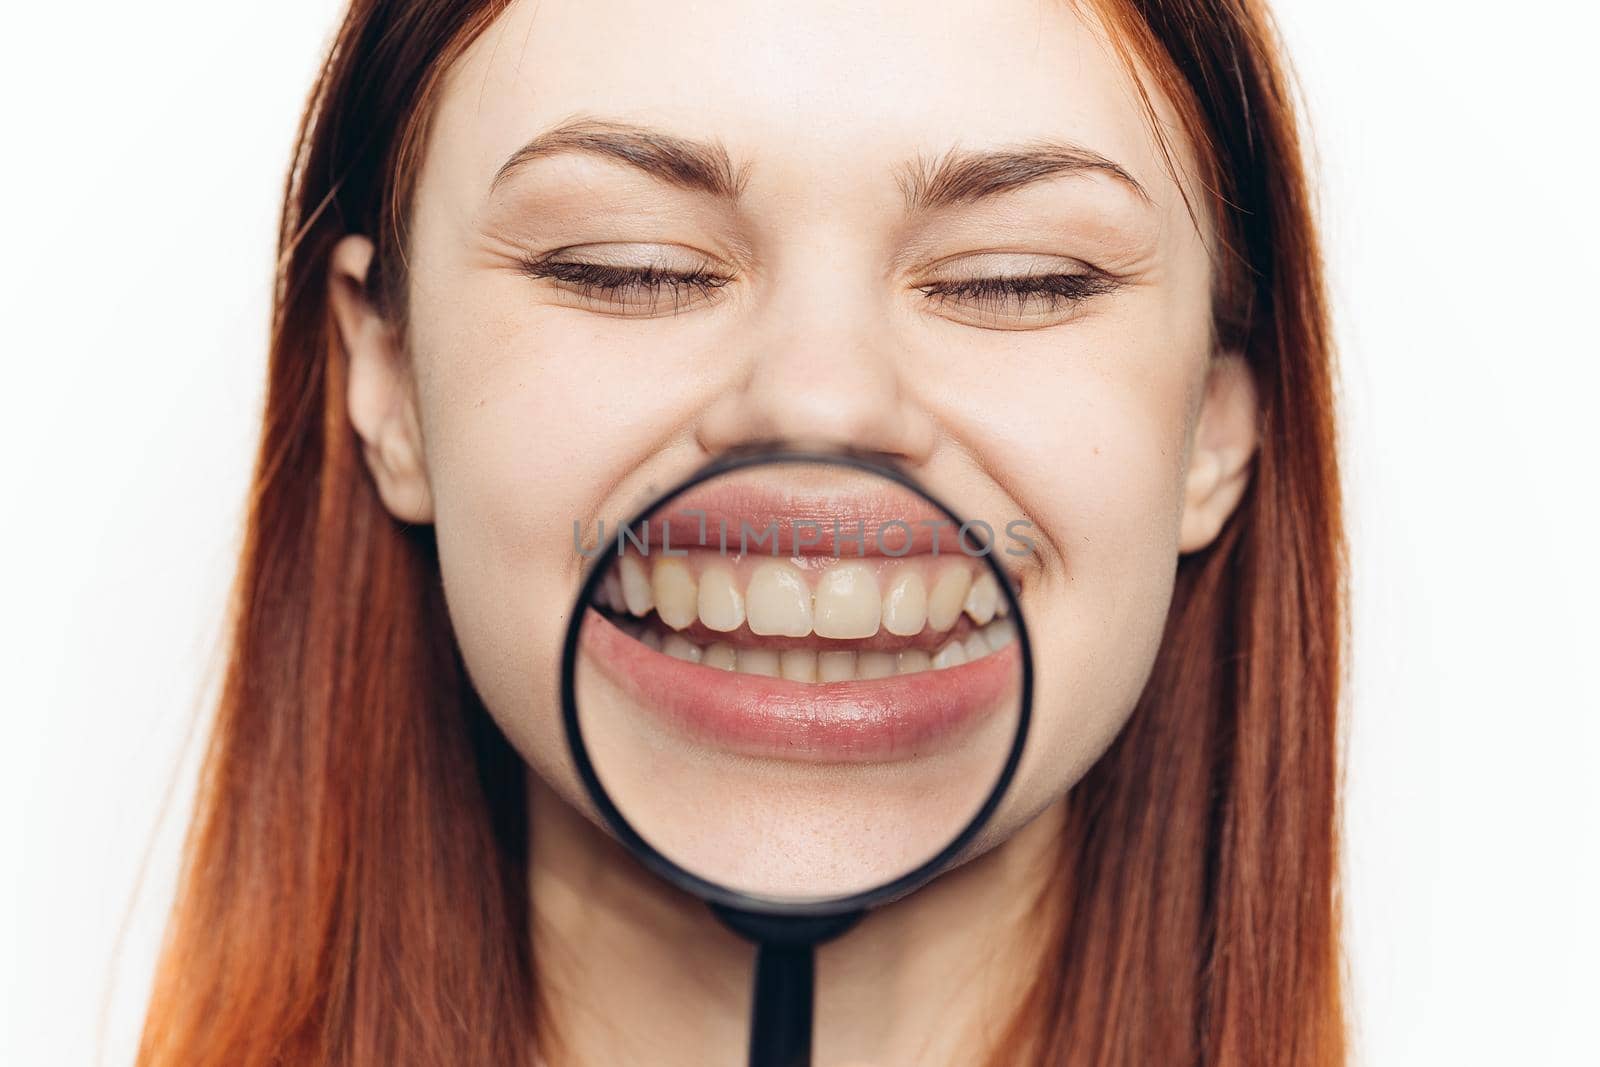 pretty woman grimacing with magnifying glass near face close-up by Vichizh